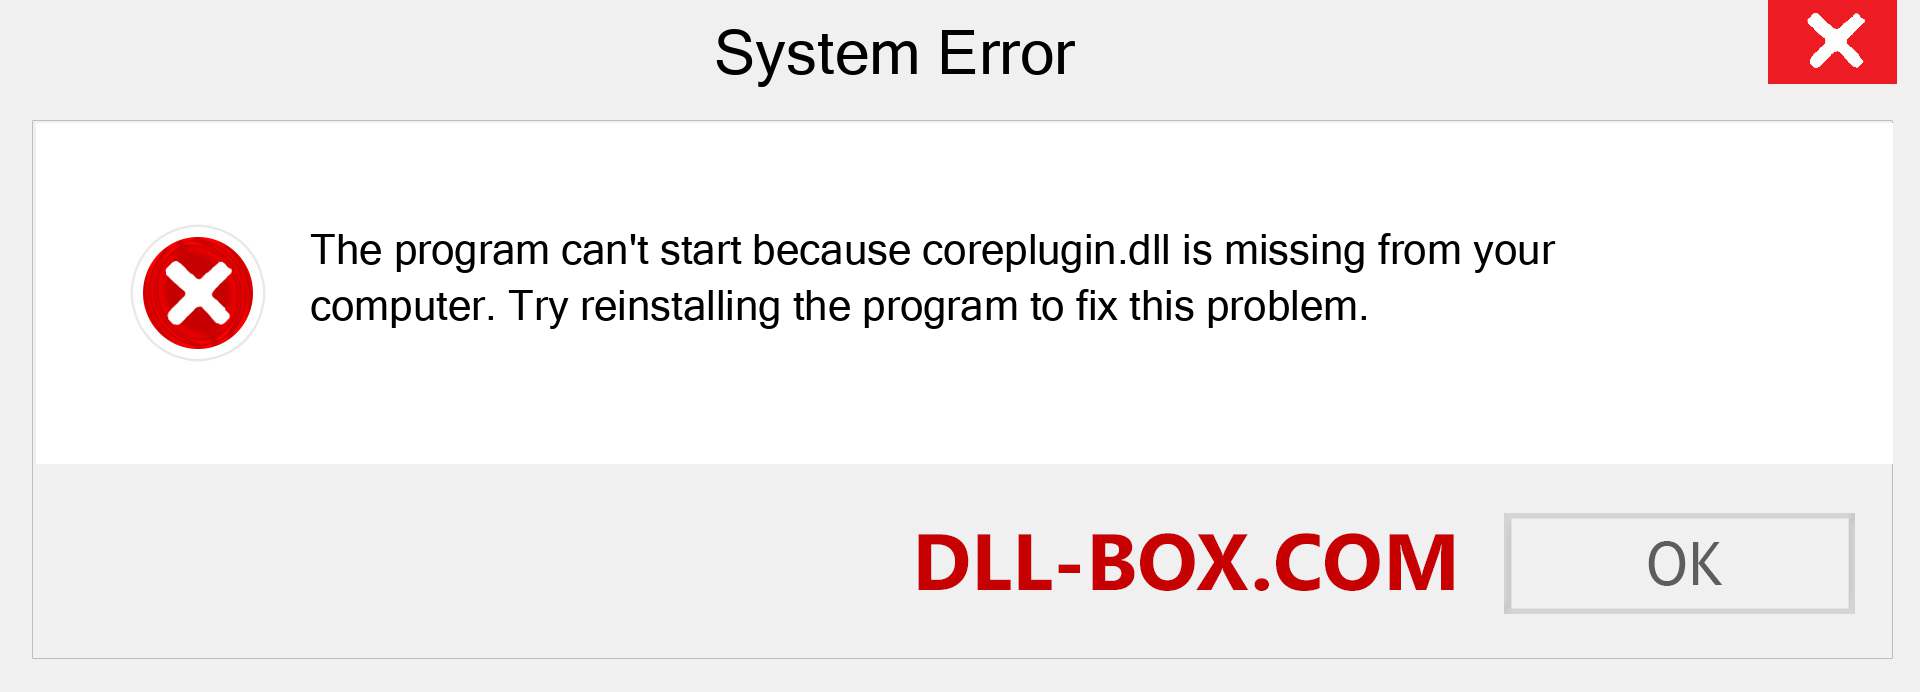  coreplugin.dll file is missing?. Download for Windows 7, 8, 10 - Fix  coreplugin dll Missing Error on Windows, photos, images